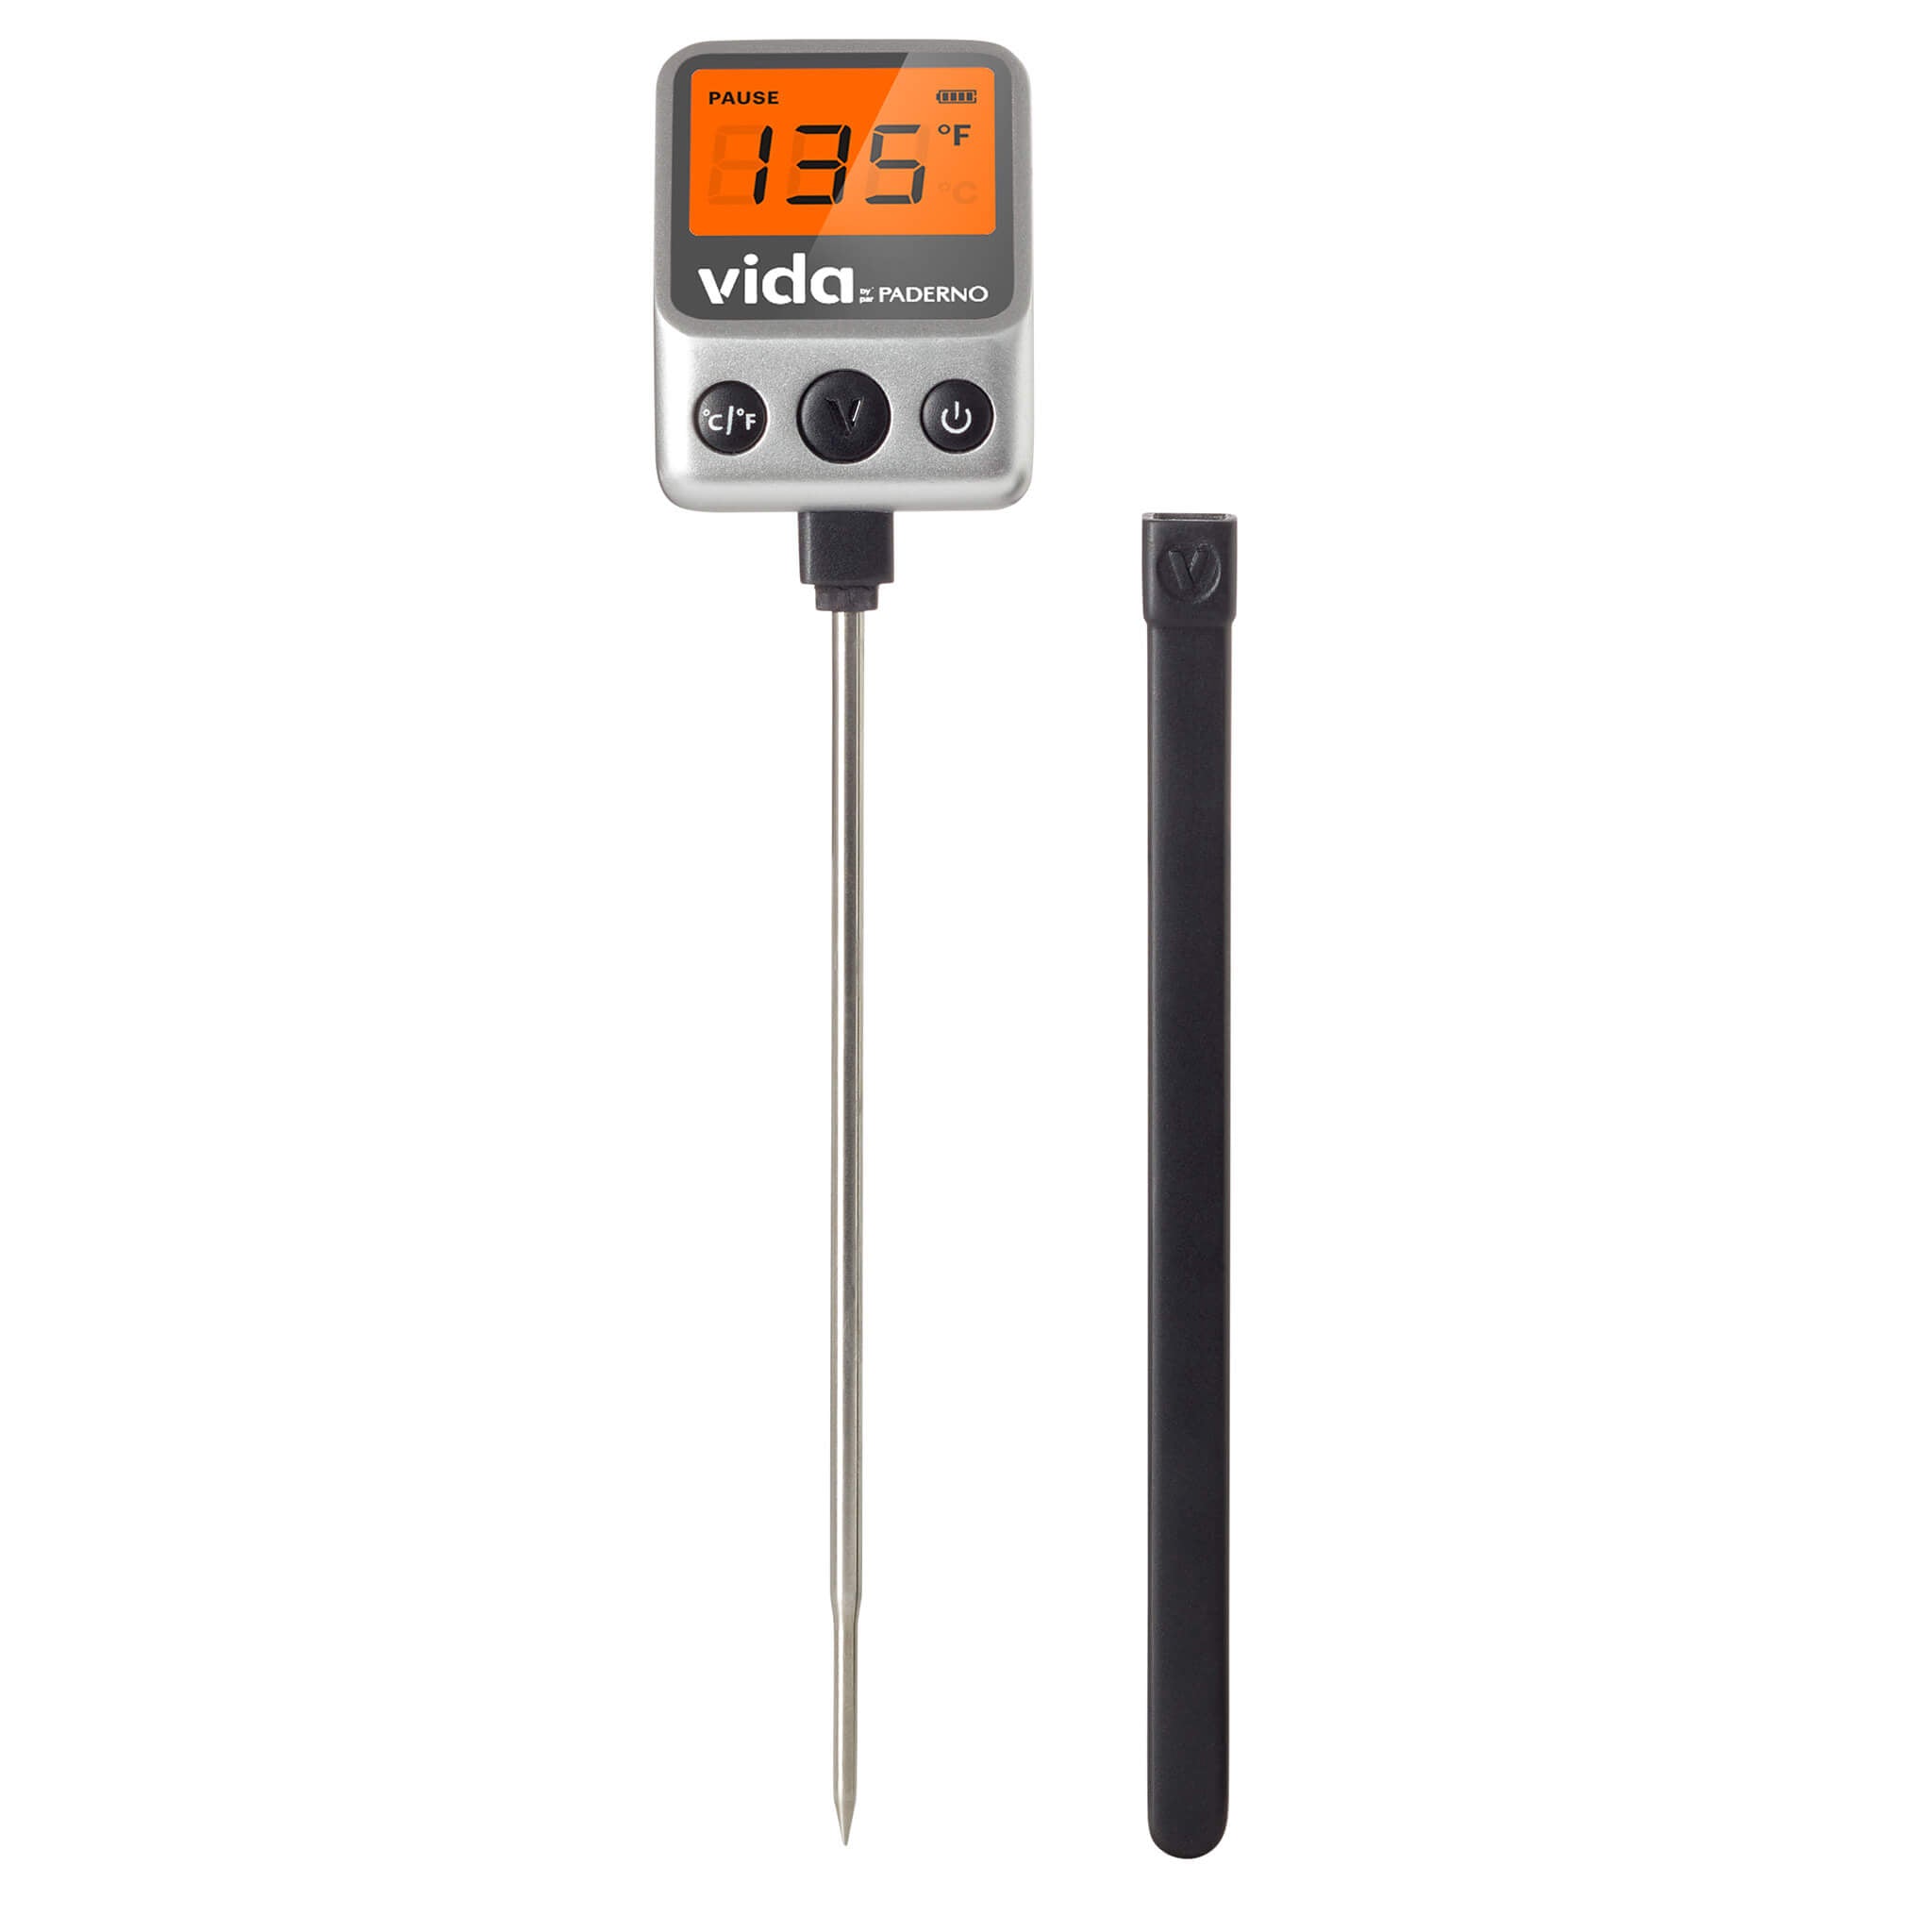 Broil King Digital Instant Read Thermometer